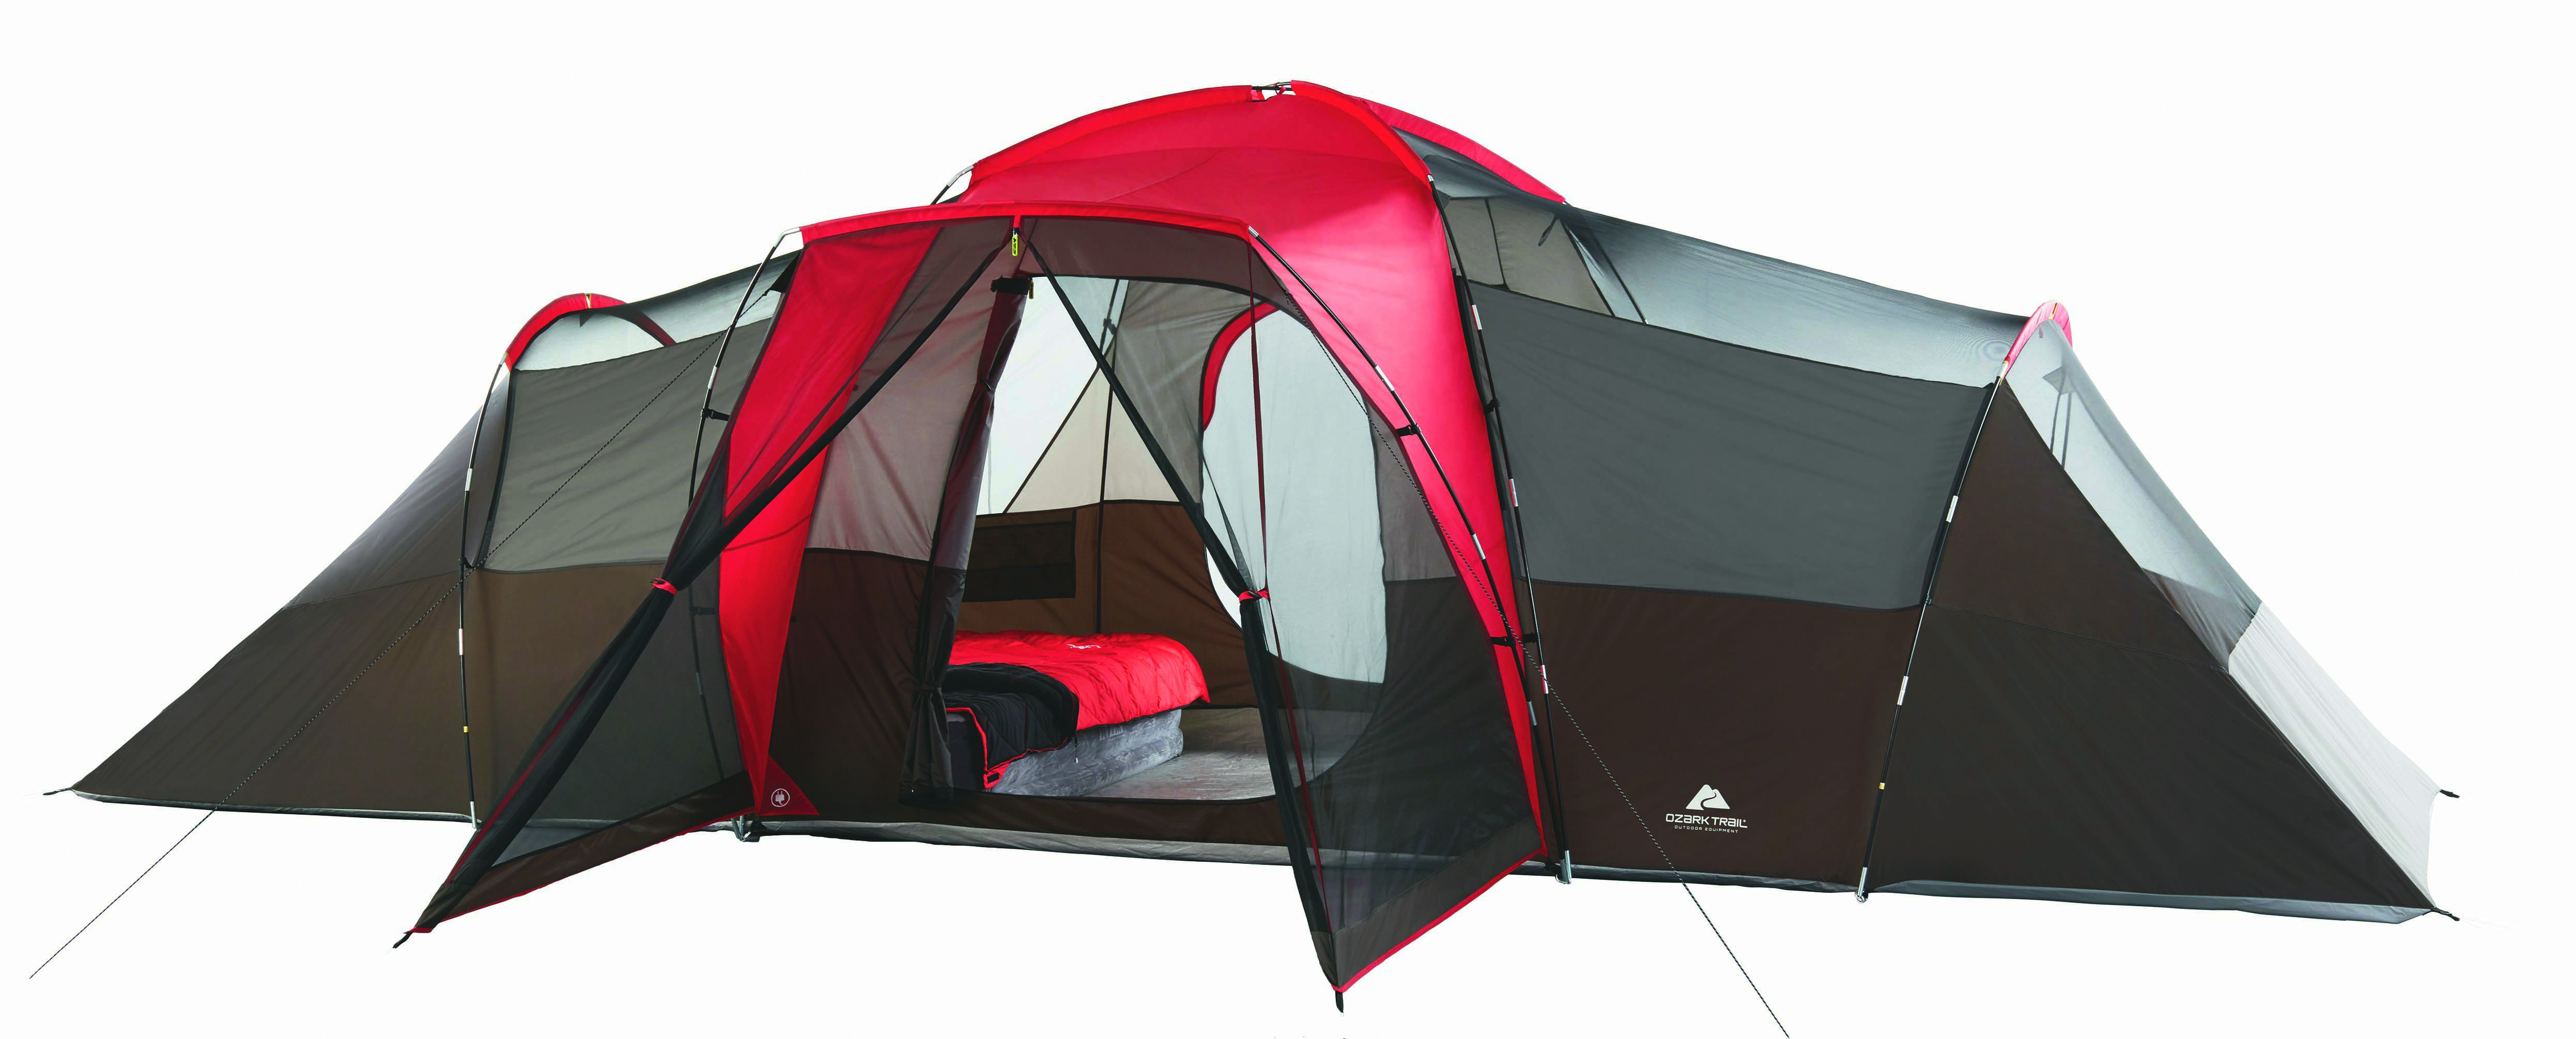 Ozark Trail, 21' x 15’ x 78” 10-Person Family Camping Tent, 26.4 lbs - image 3 of 11